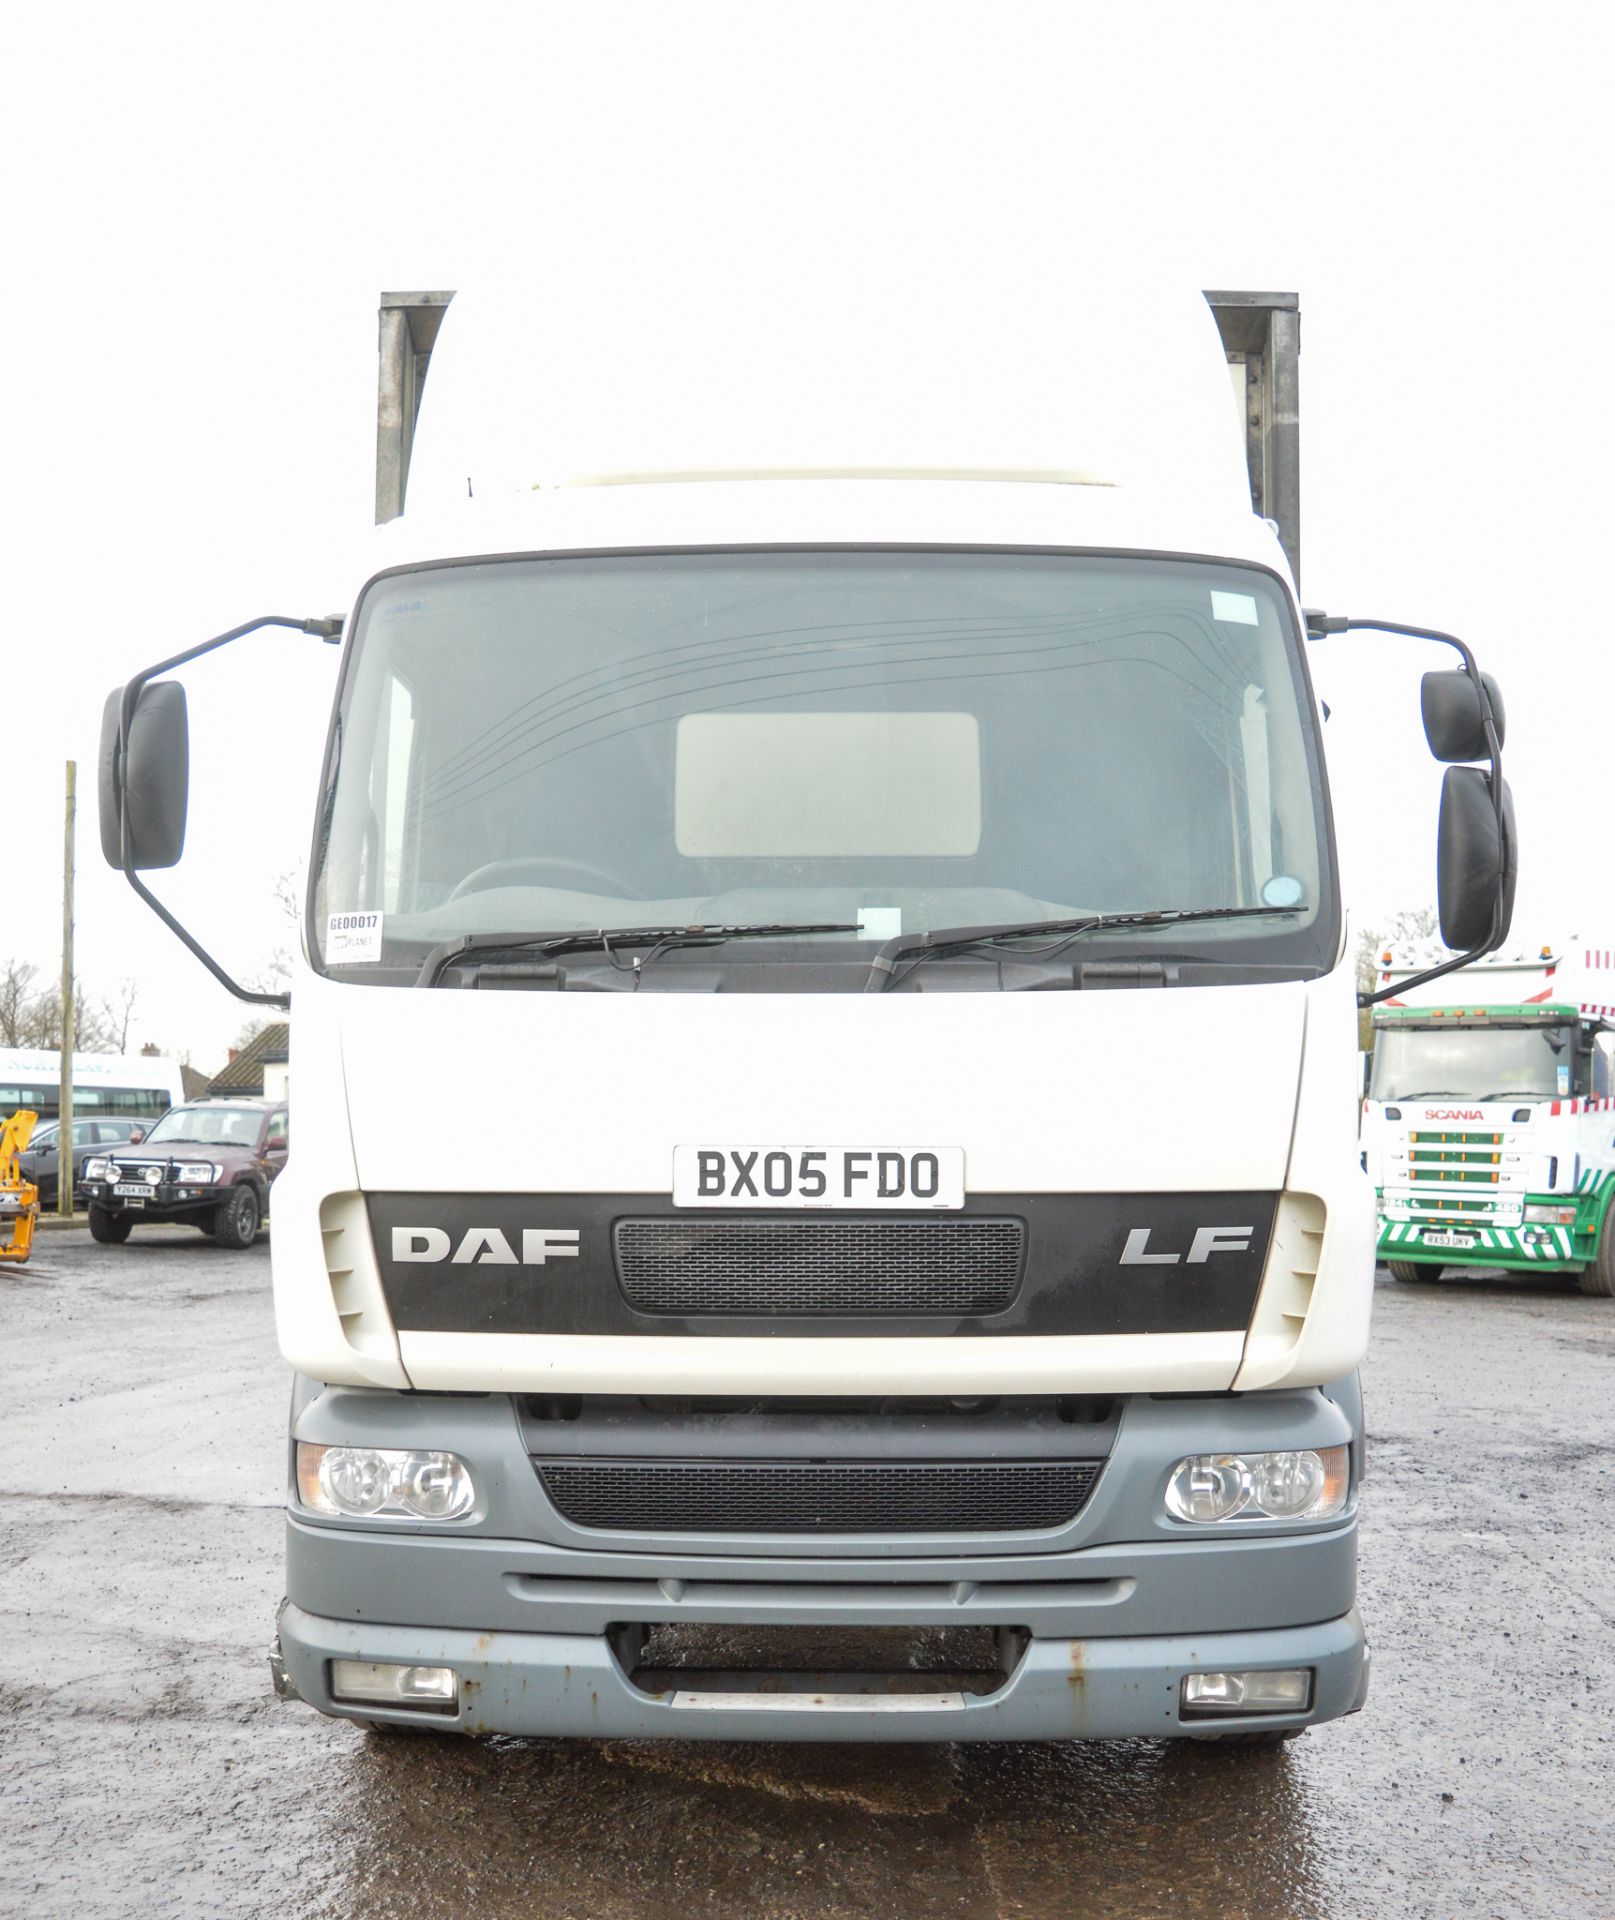 DAF 55-220 18 tonne curtain side flat bed lorry Registration Number: BX05 FDO Date of - Image 2 of 9